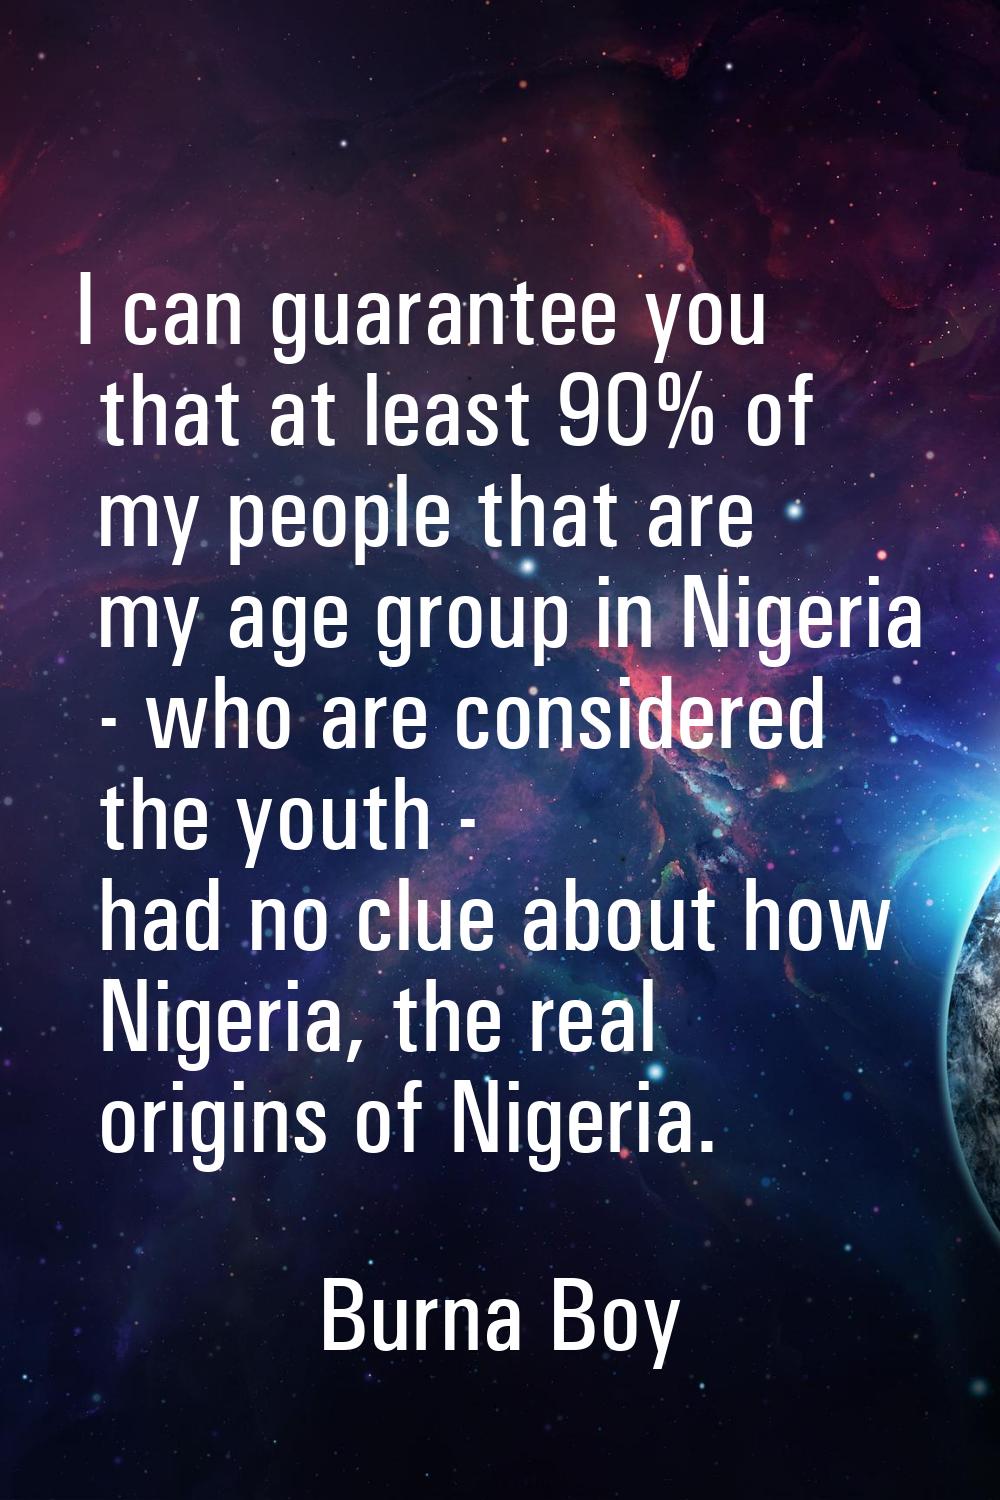 I can guarantee you that at least 90% of my people that are my age group in Nigeria - who are consi